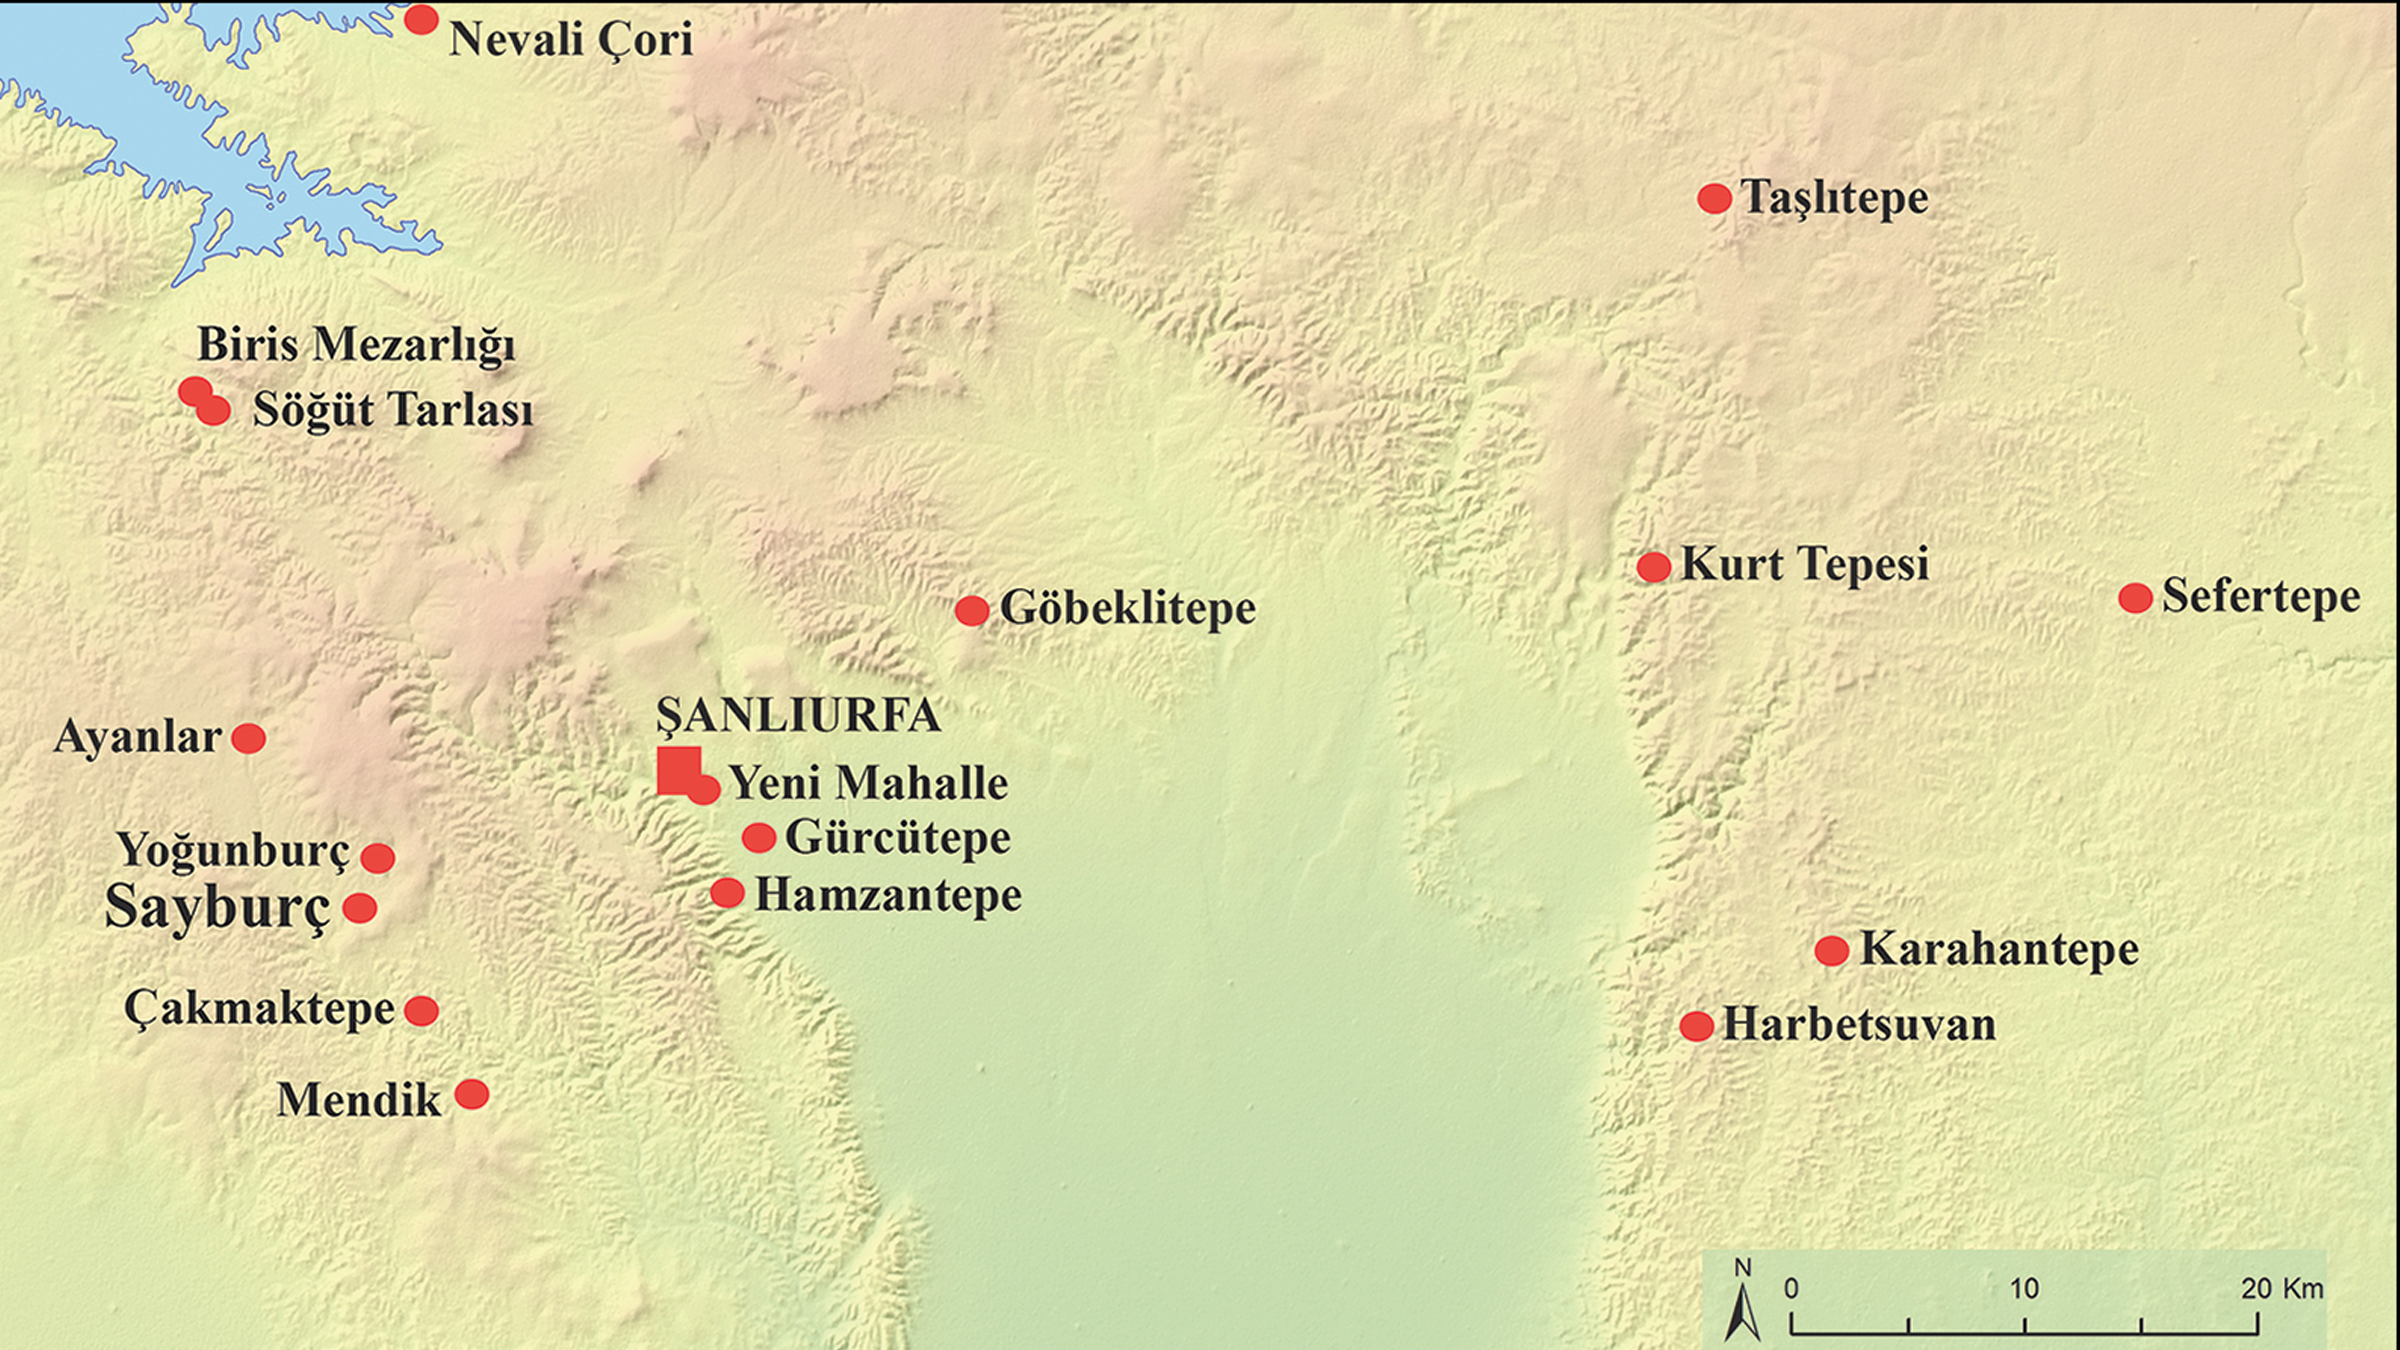 This map shows Neolithic sites in Urfa (also known as Şanlıurfa), Turkey.